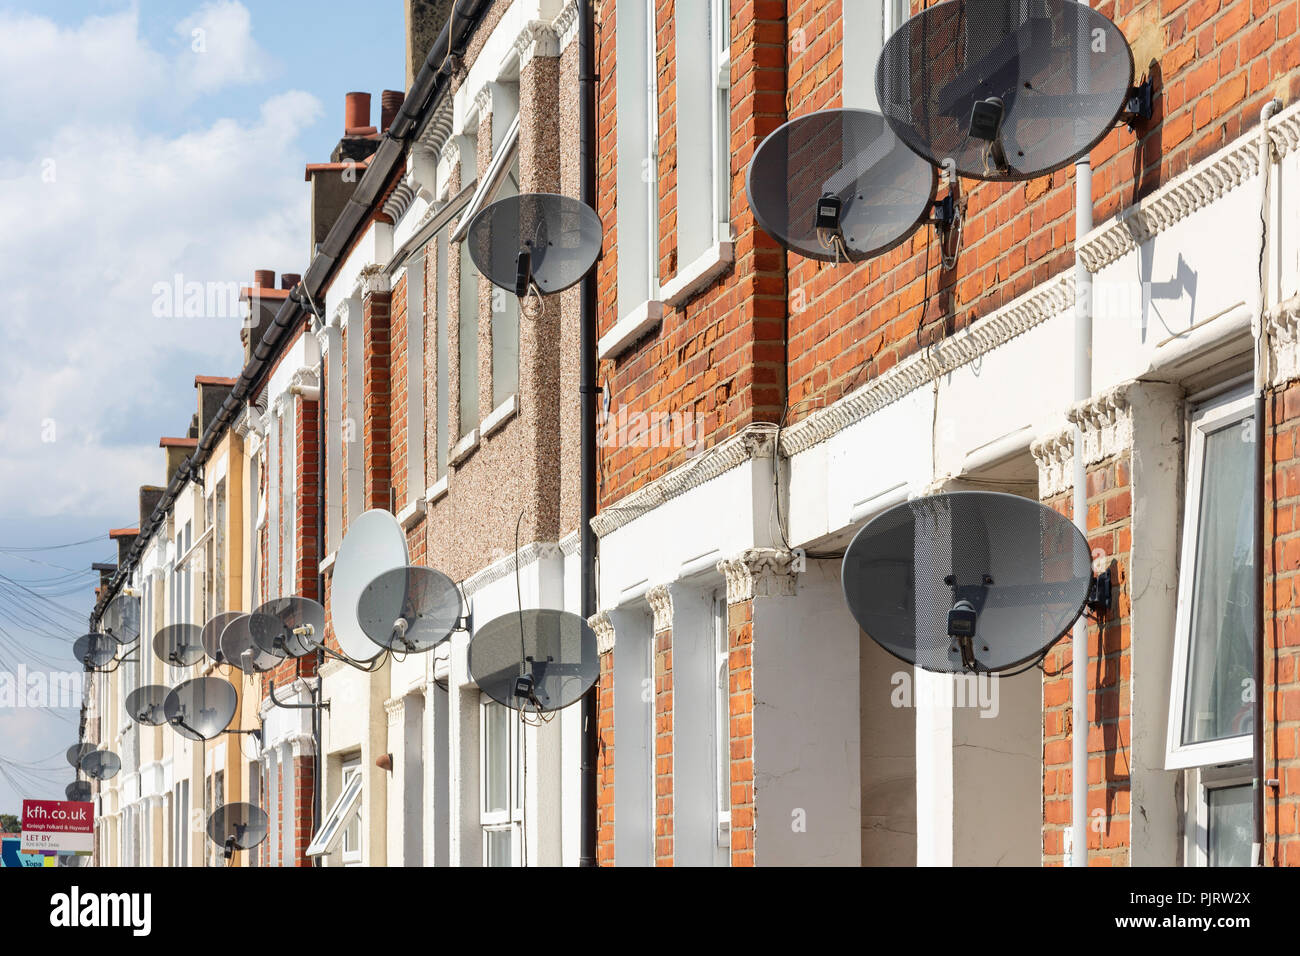 Satellite dishes on front of terraced houses, Cilbey Road, Tooting, London Borough of Wandsworth, Greater London, England, United Kingdom Stock Photo